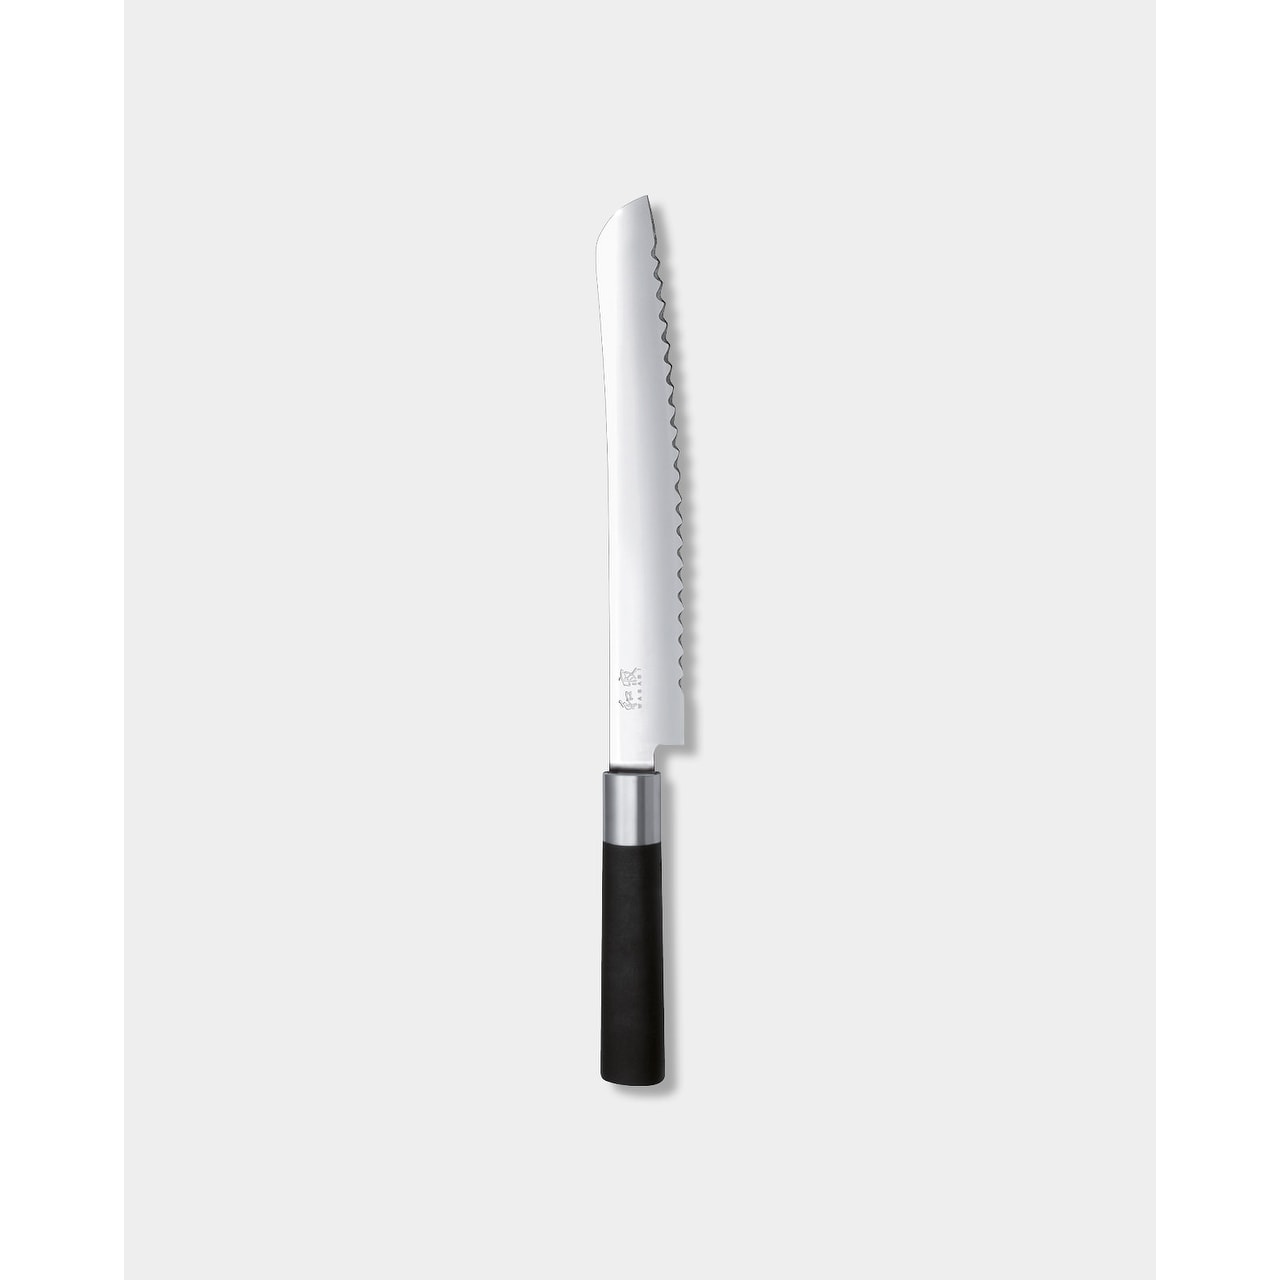 https://ak1.ostkcdn.com/images/products/is/images/direct/0adad82fcf1a0464f96b34ef39c454870e8b71b9/Kai-6723B-Wasabi-Black-Bread-Knife%2C-9-Inch.jpg